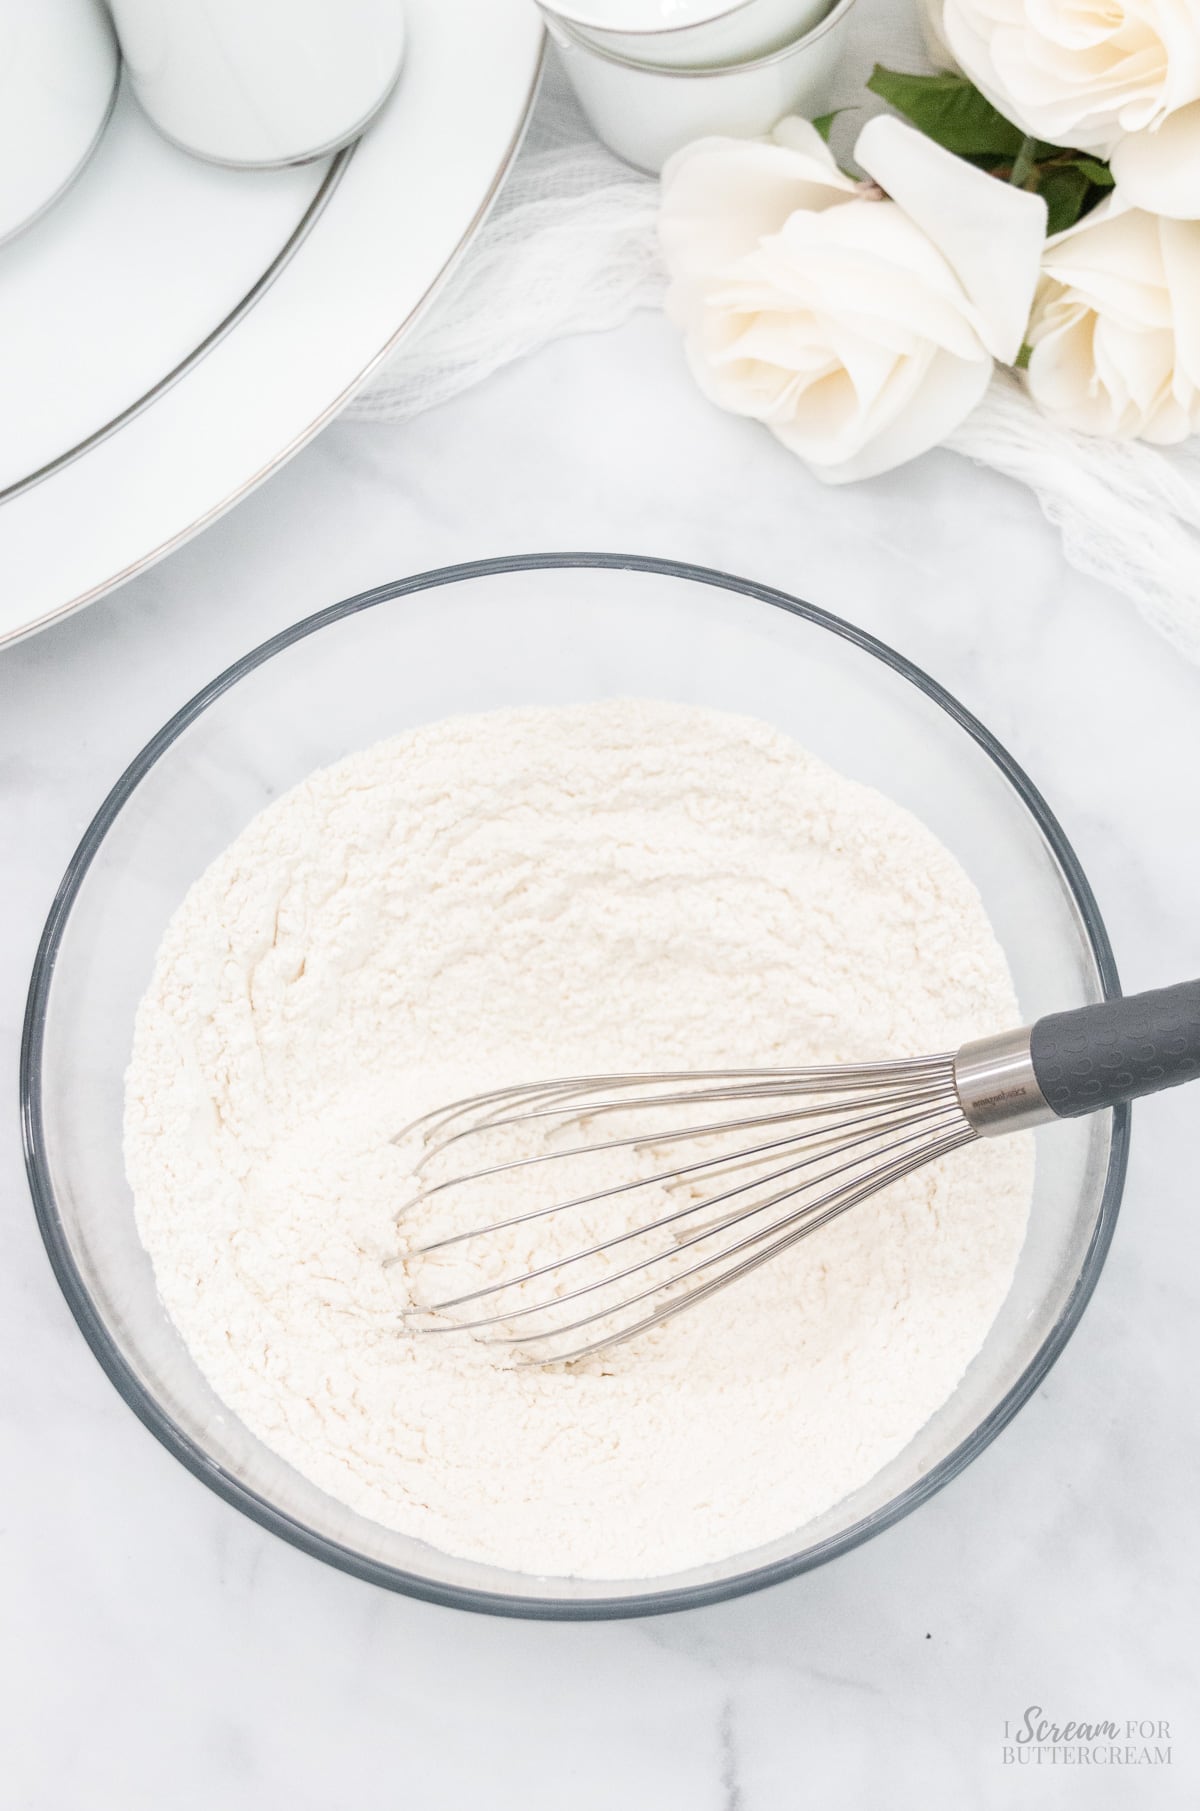 Dry cake batter ingredients in a glass bowl with a whisk.